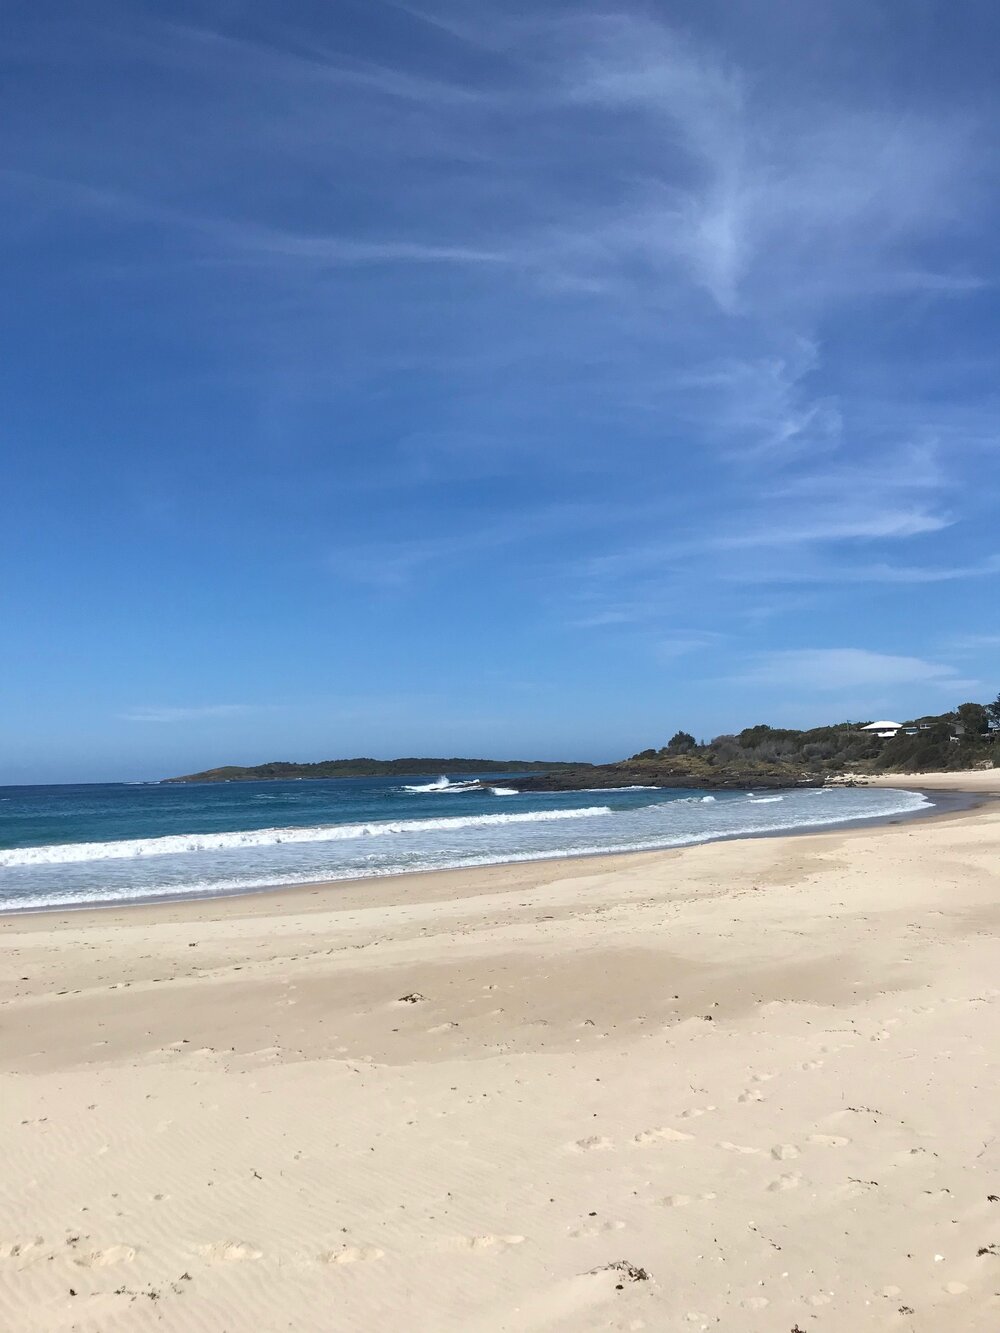 One of the top five beaches in NSW is Bawley Point